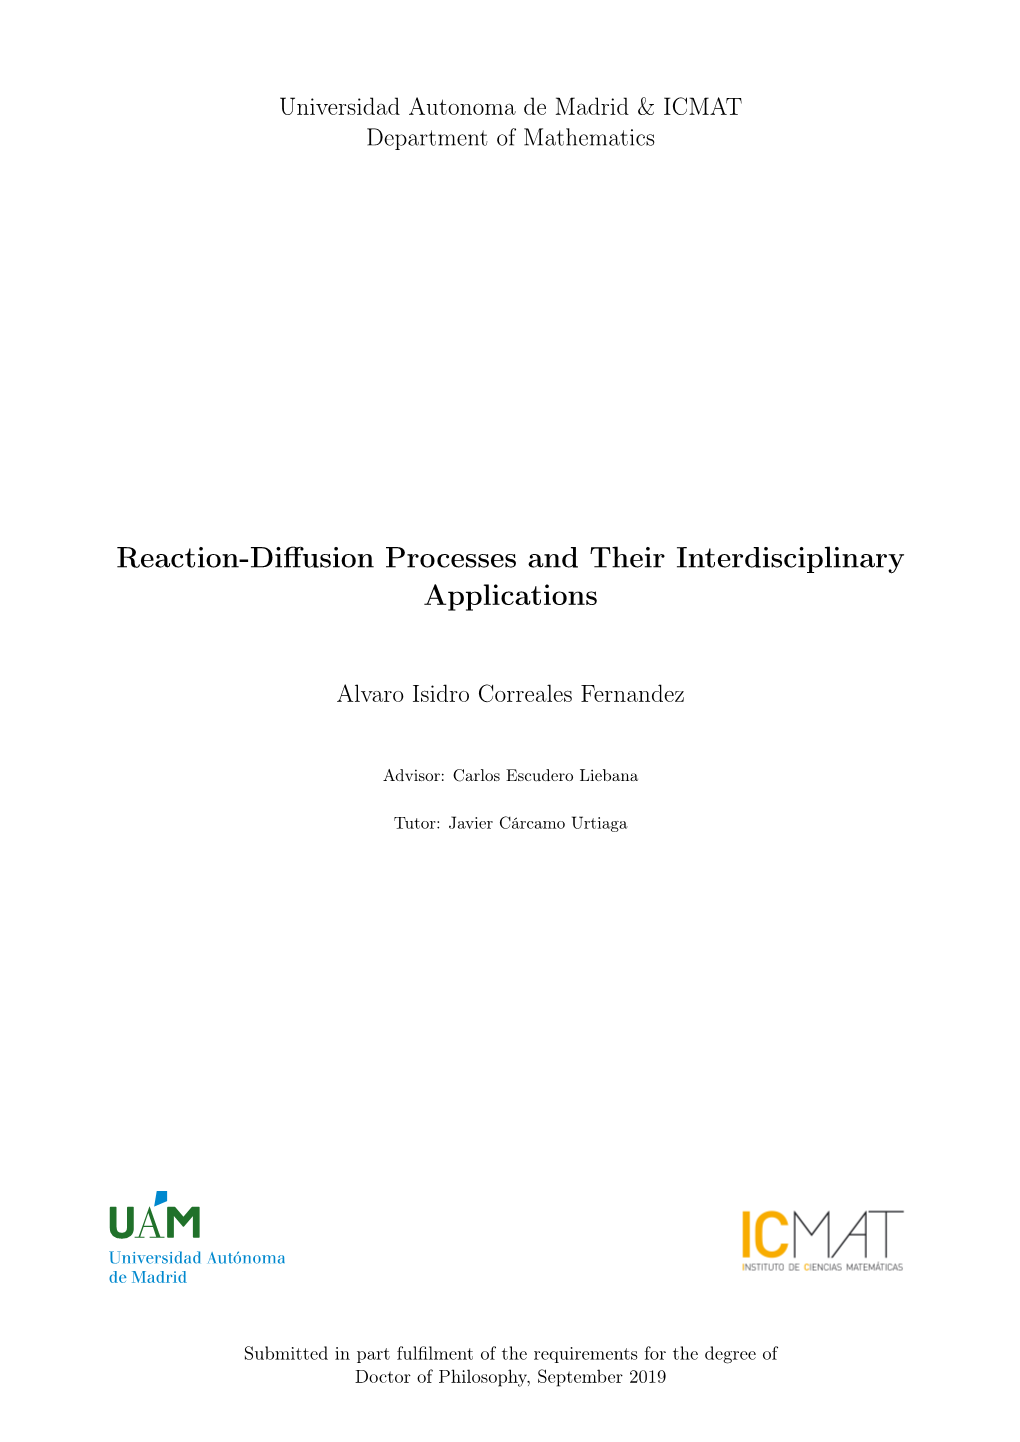 Reaction-Diffusion Processes and Their Interdisciplinary Applications